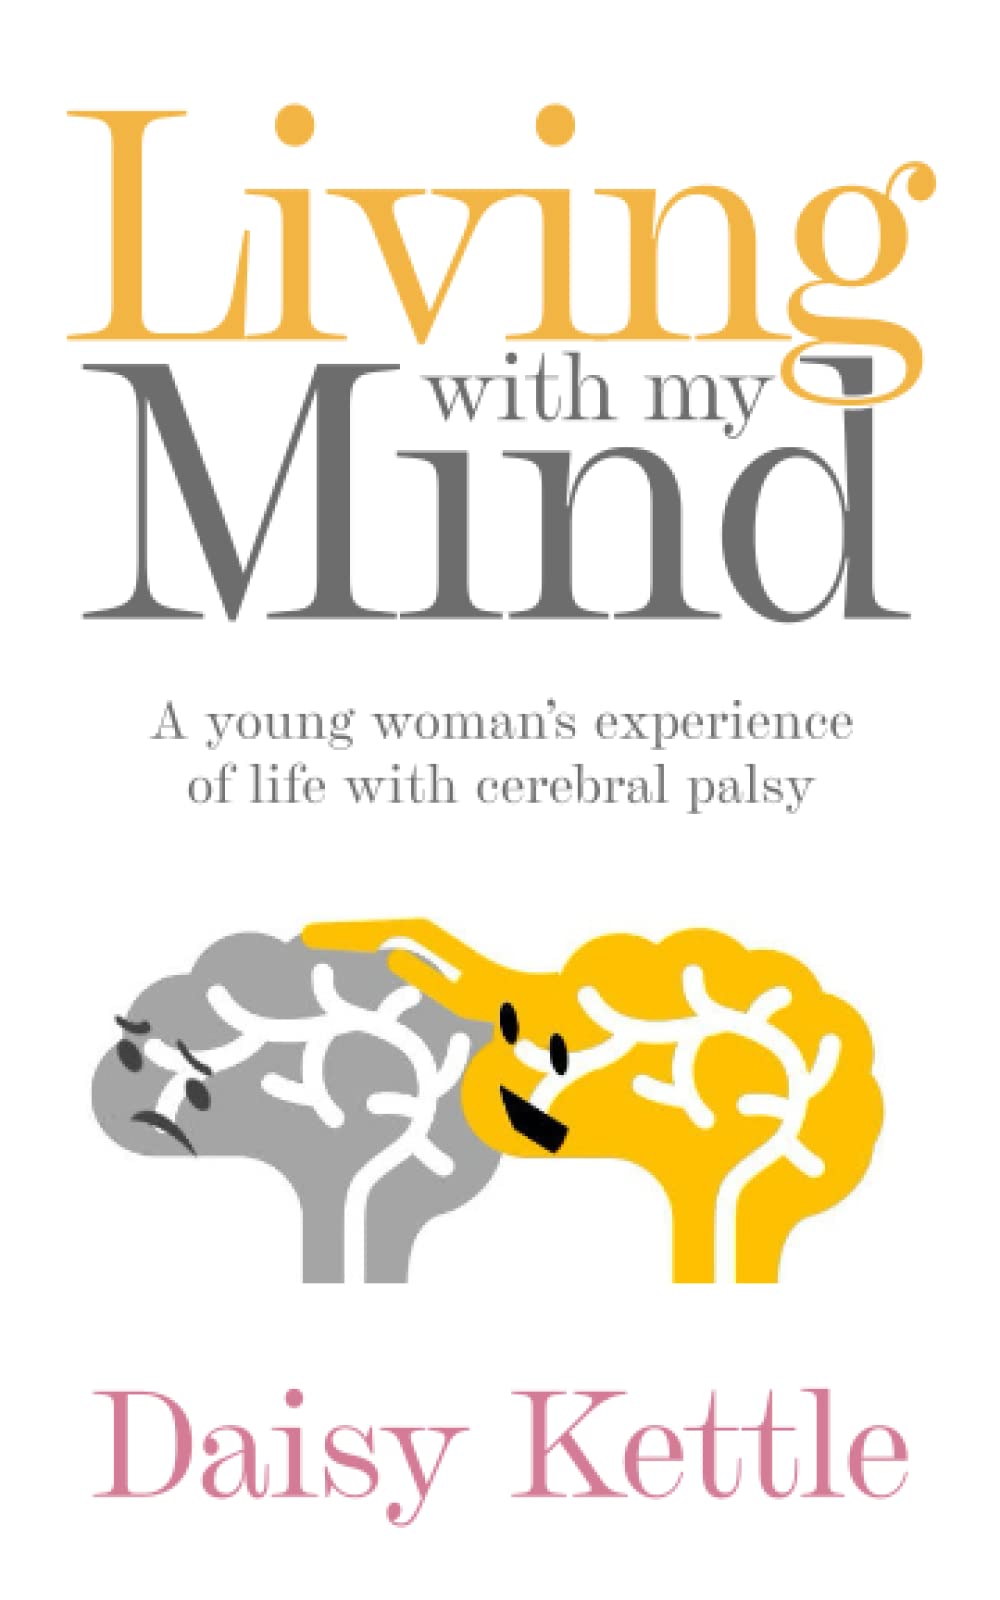 Book cover for Living with my Mind by Daisy Kettle featuring an illustration of a yellow anthropomorphised yellow brain touching the top of a grey-coloured brain in front